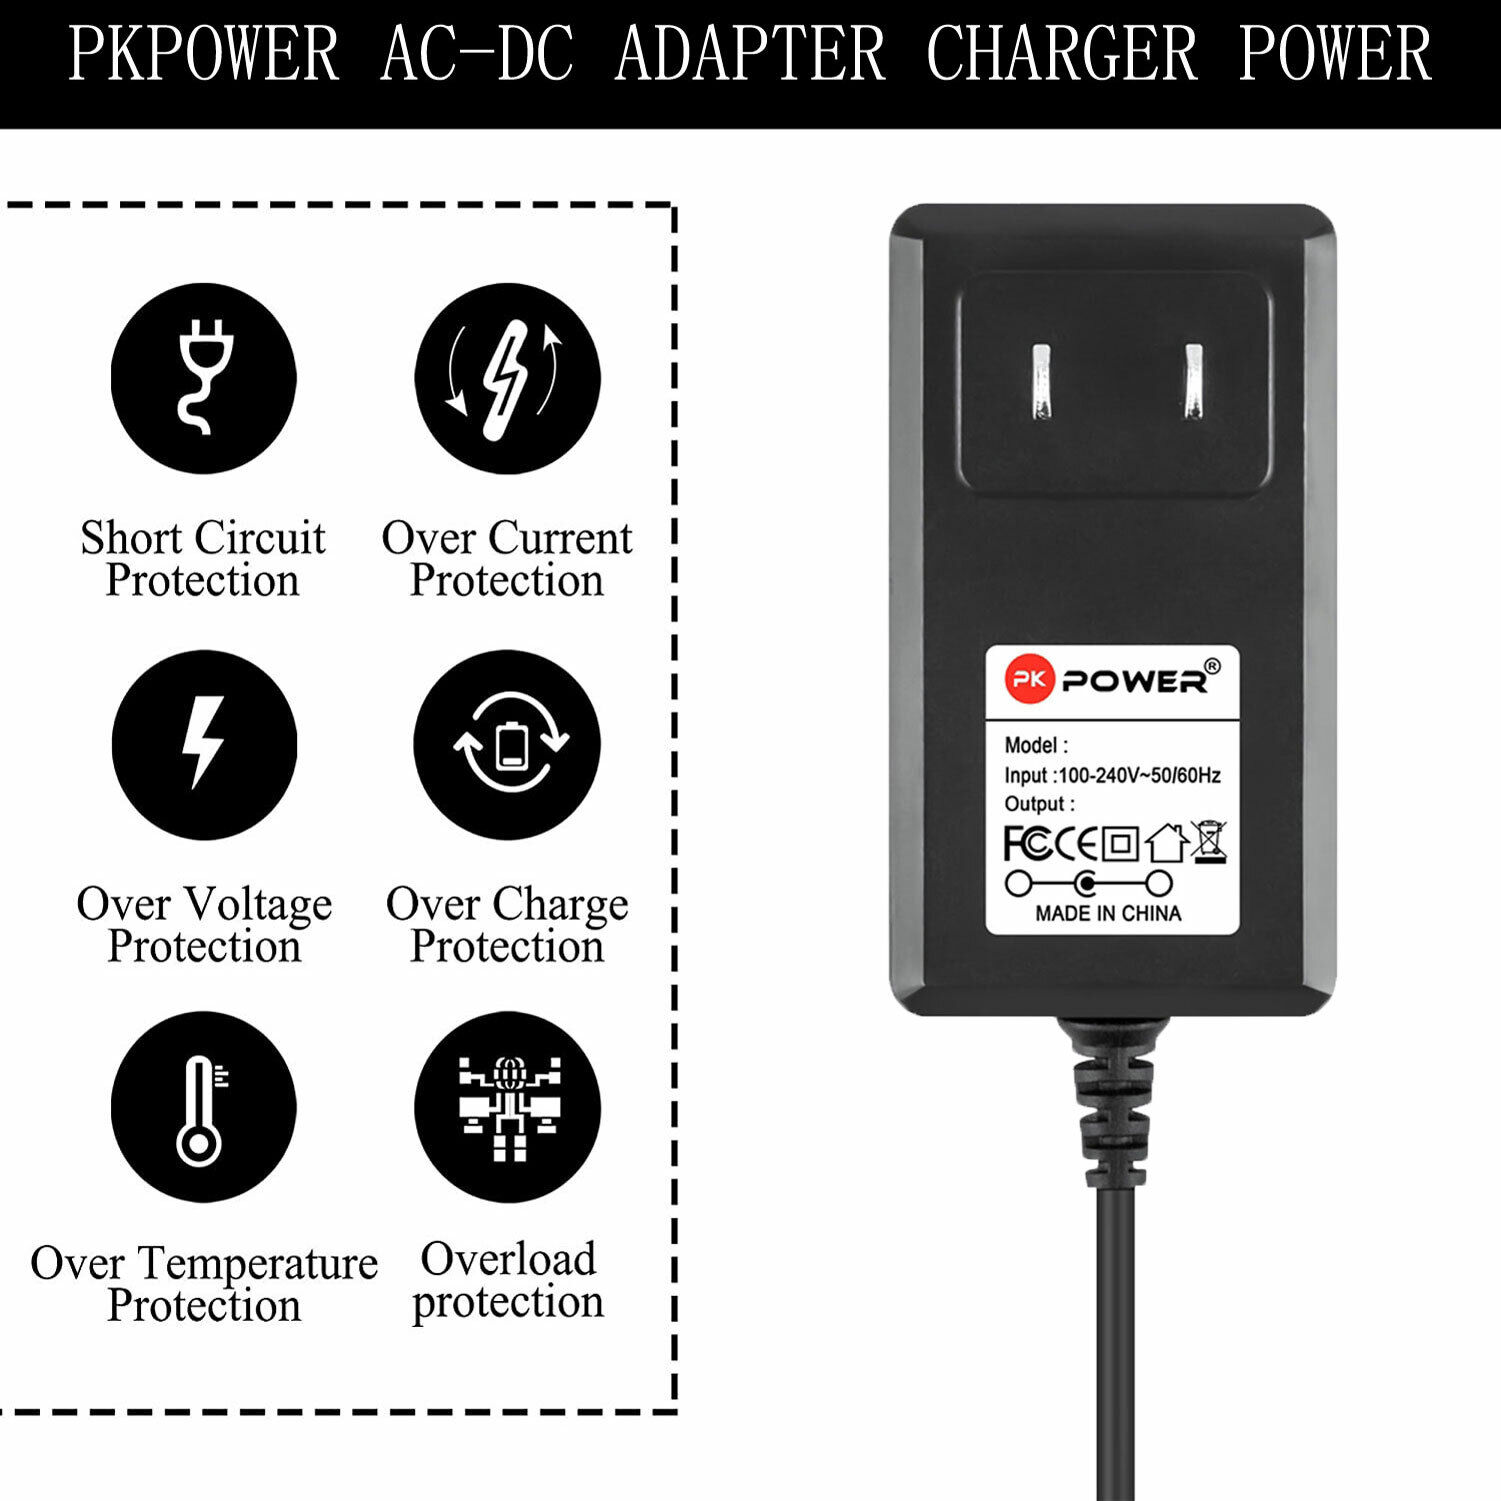 Pkpower Adapter for iRobot Braava 380 320 321 Floor Mopping Robot Cleaner Mains PKPOWER Does not apply - фотография #4